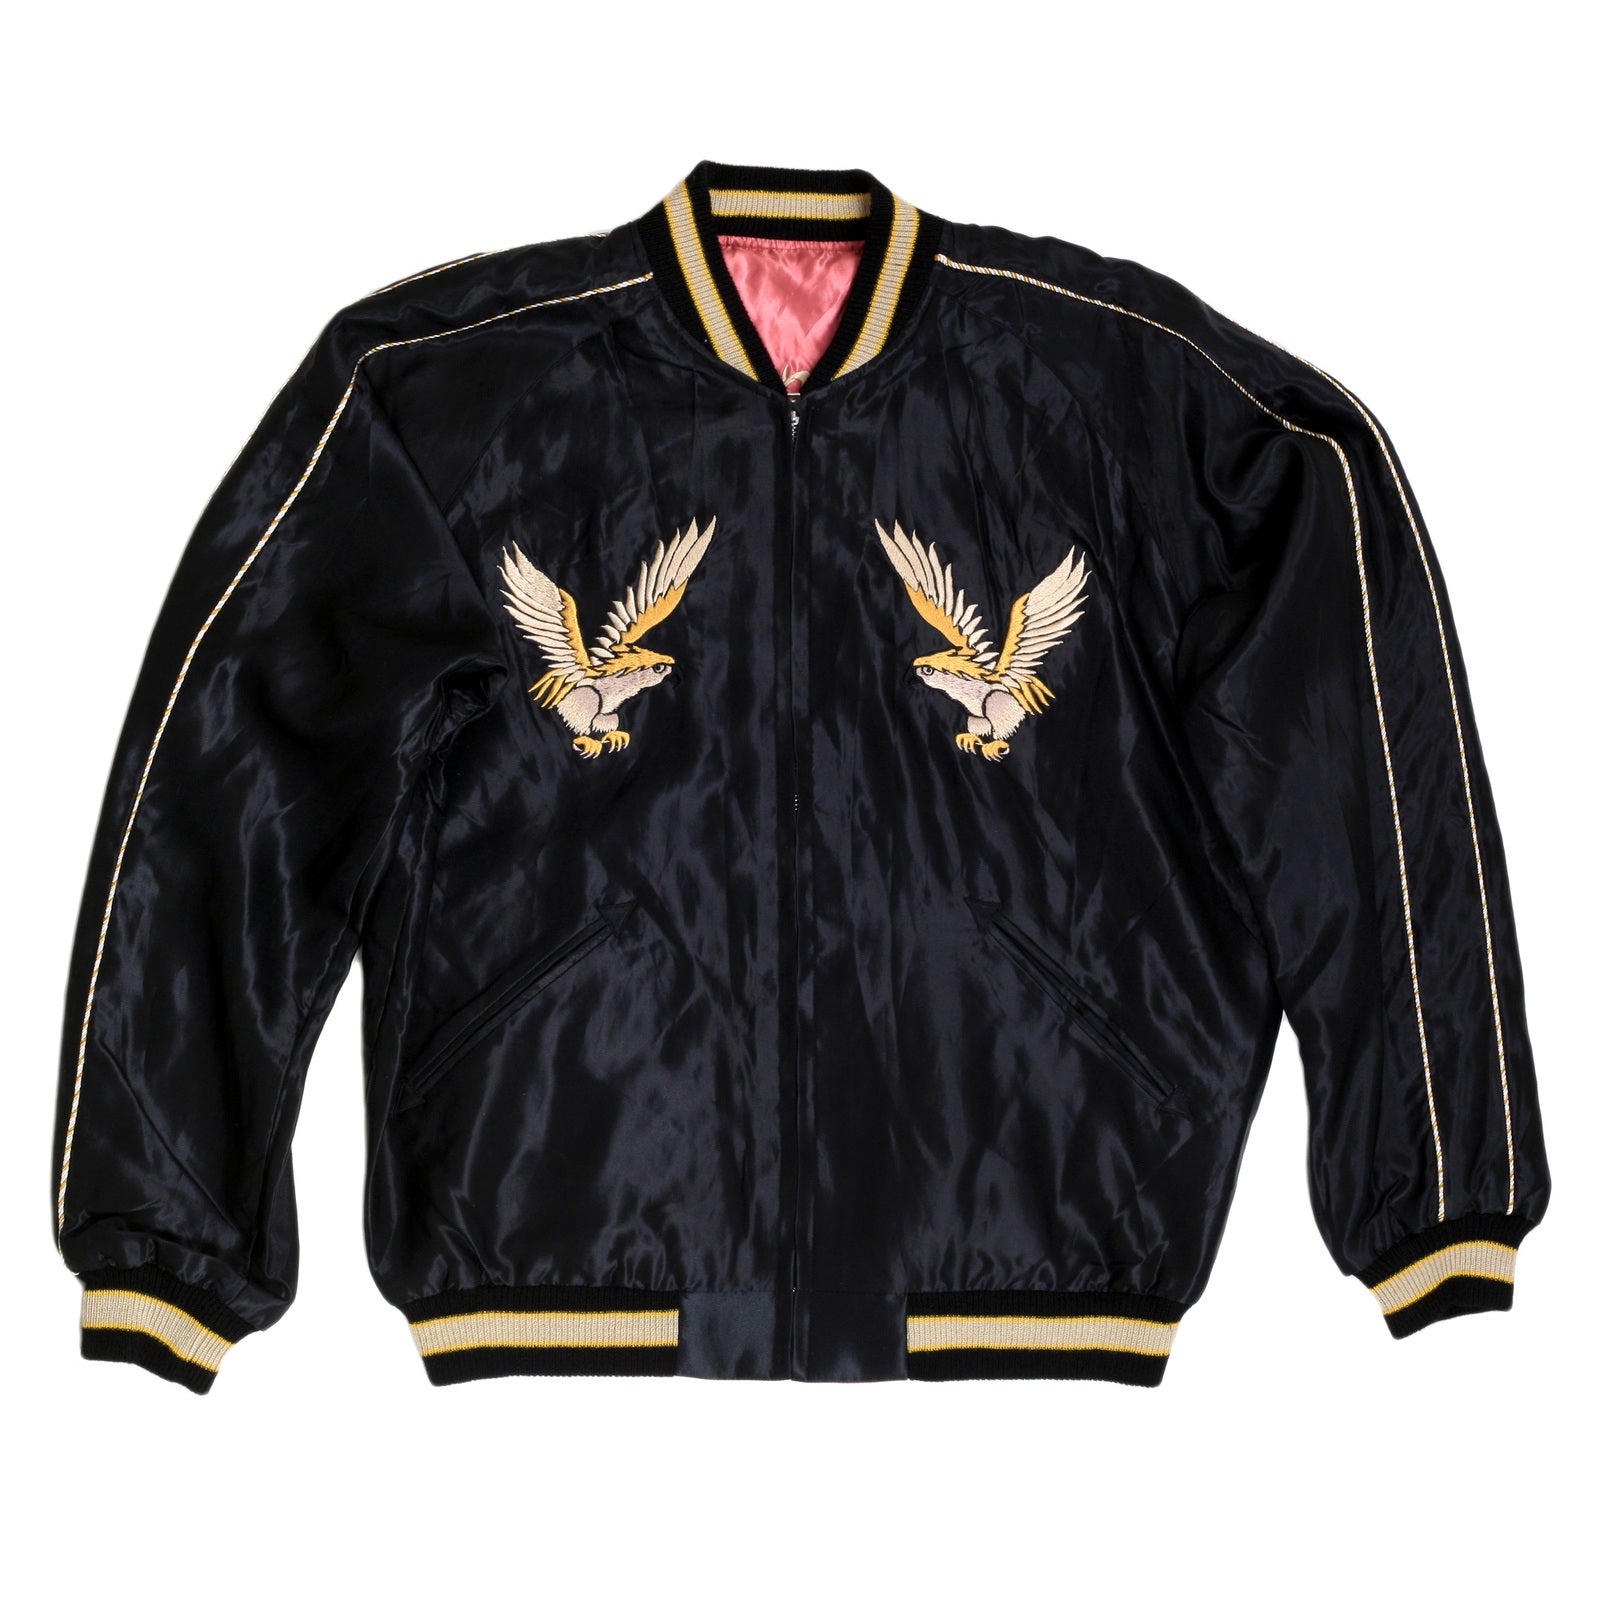 EMBROIDERED SOUVENIR JACKET - Ready to Wear